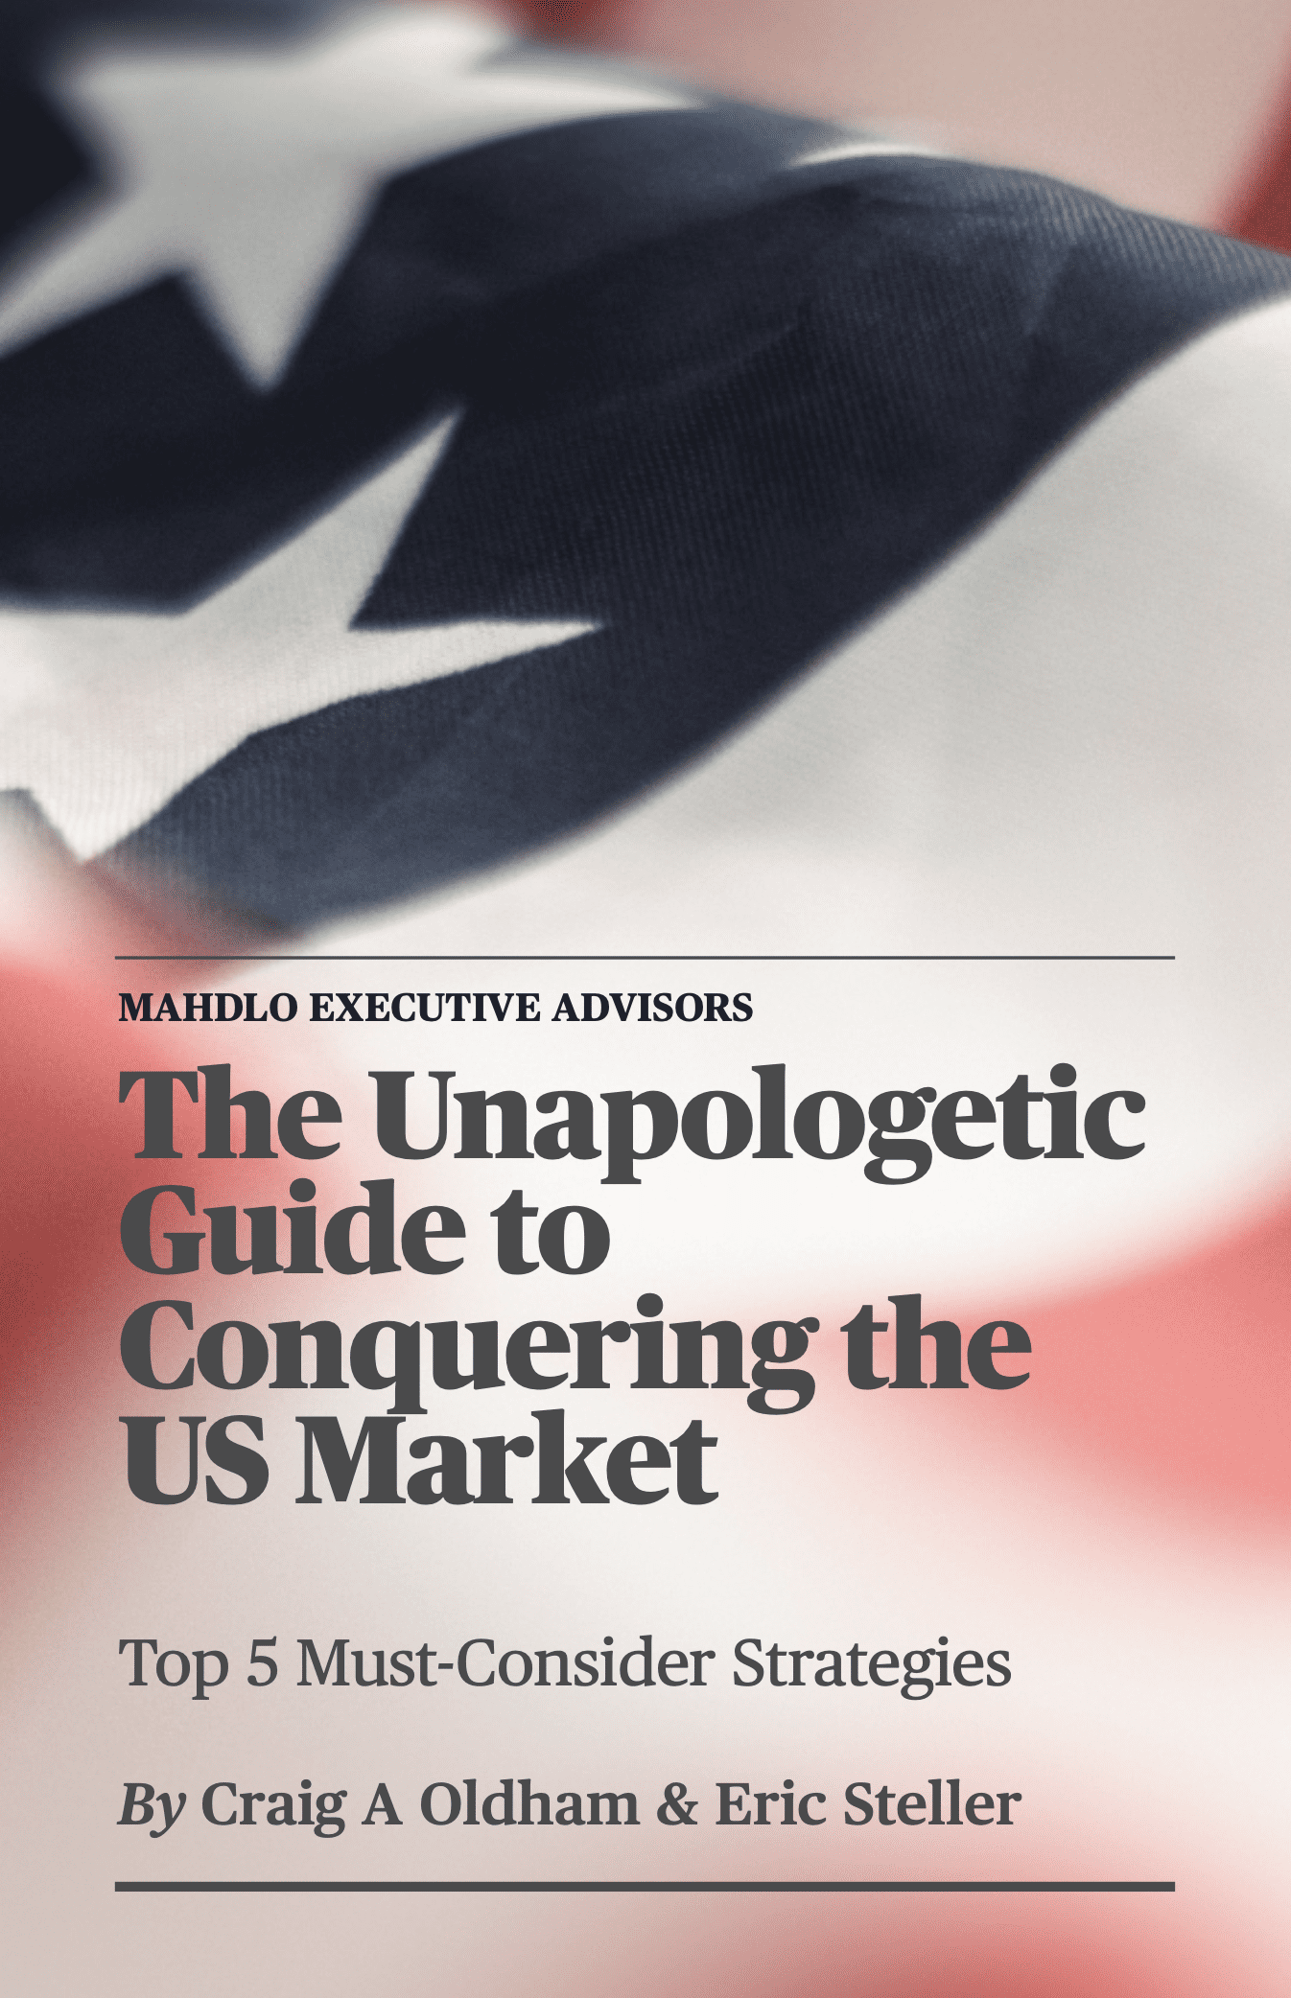 Unapologetic Guide to Conquering the US Market